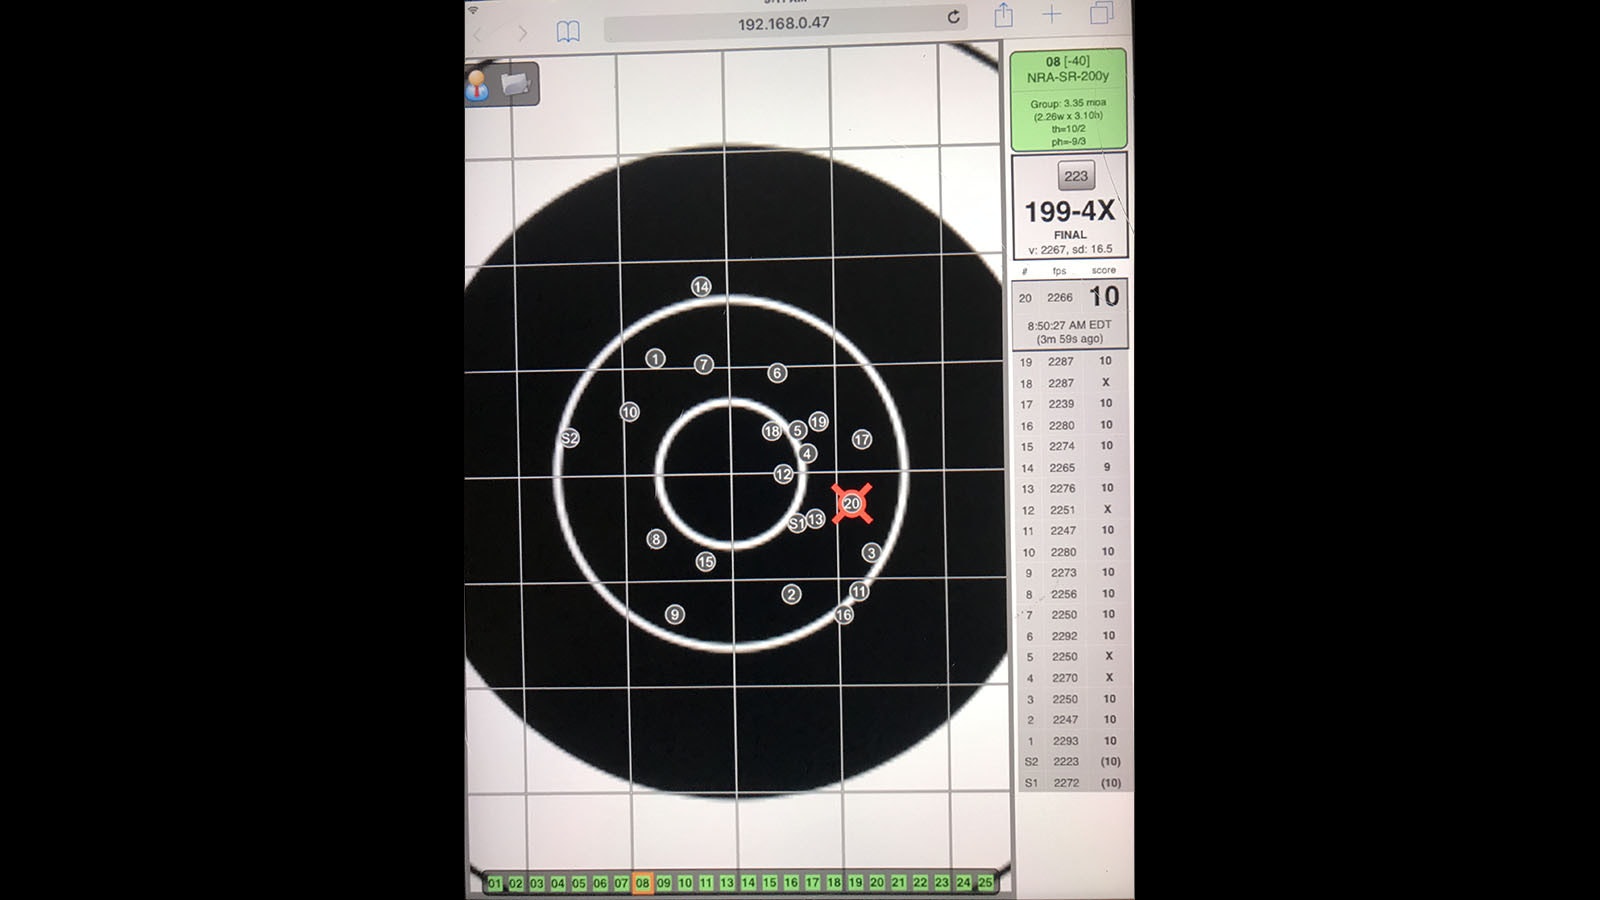 This was one of the winning targets shot by Kenny Lankford of Albany during this year’s National NRA Match Rifle Championship at Camp Atterbury, Indiana in July.